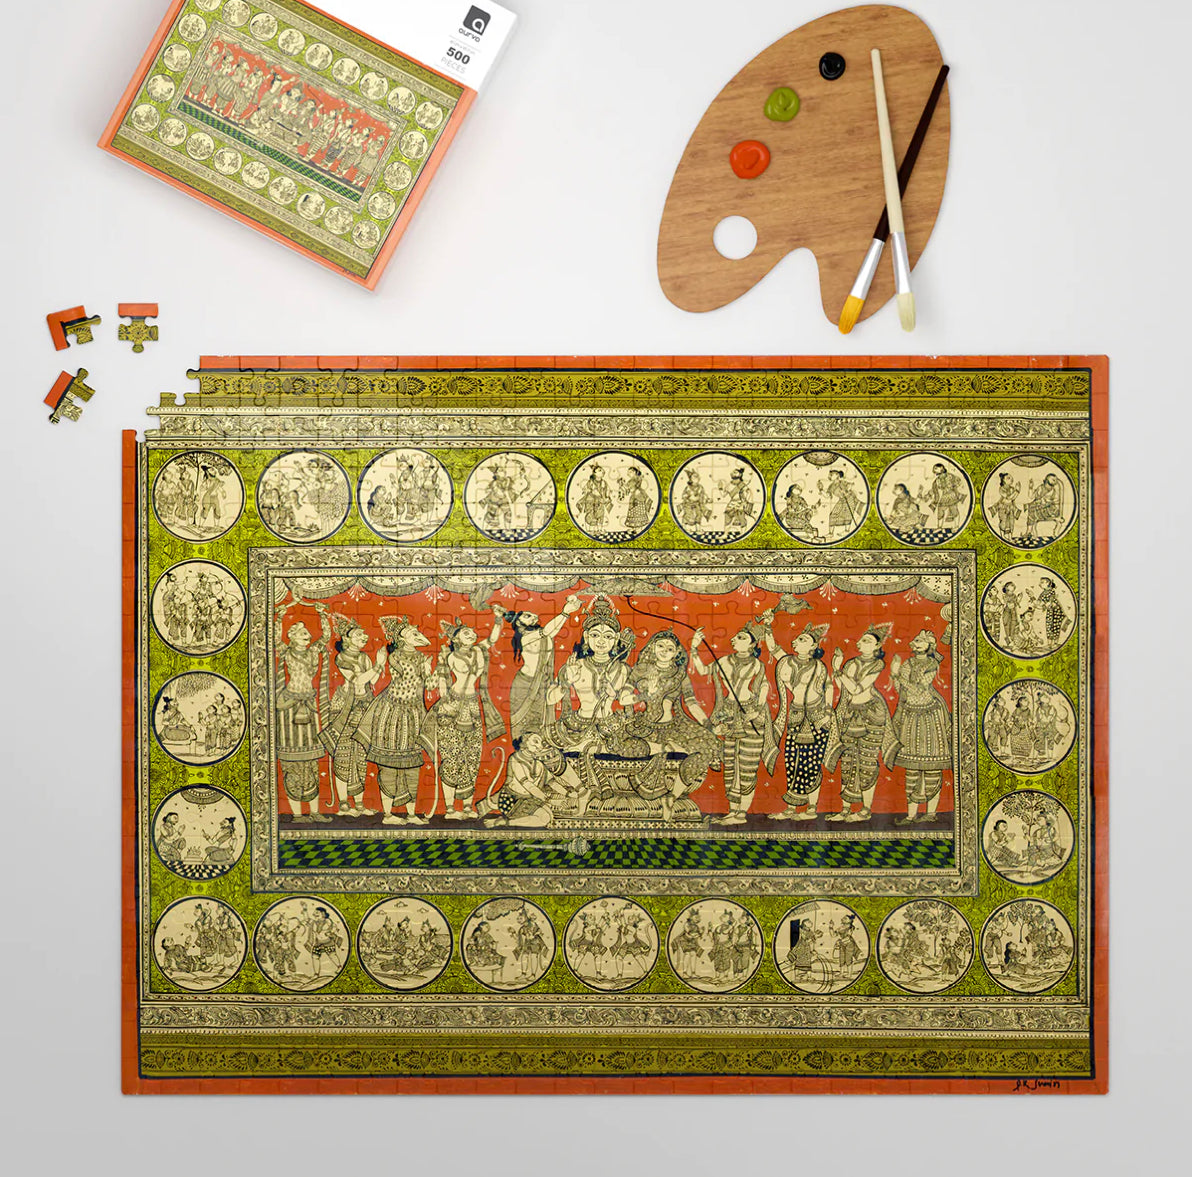 Pattachitra - Handcrafted Storyboards - 500 Piece Jigsaw Puzzle